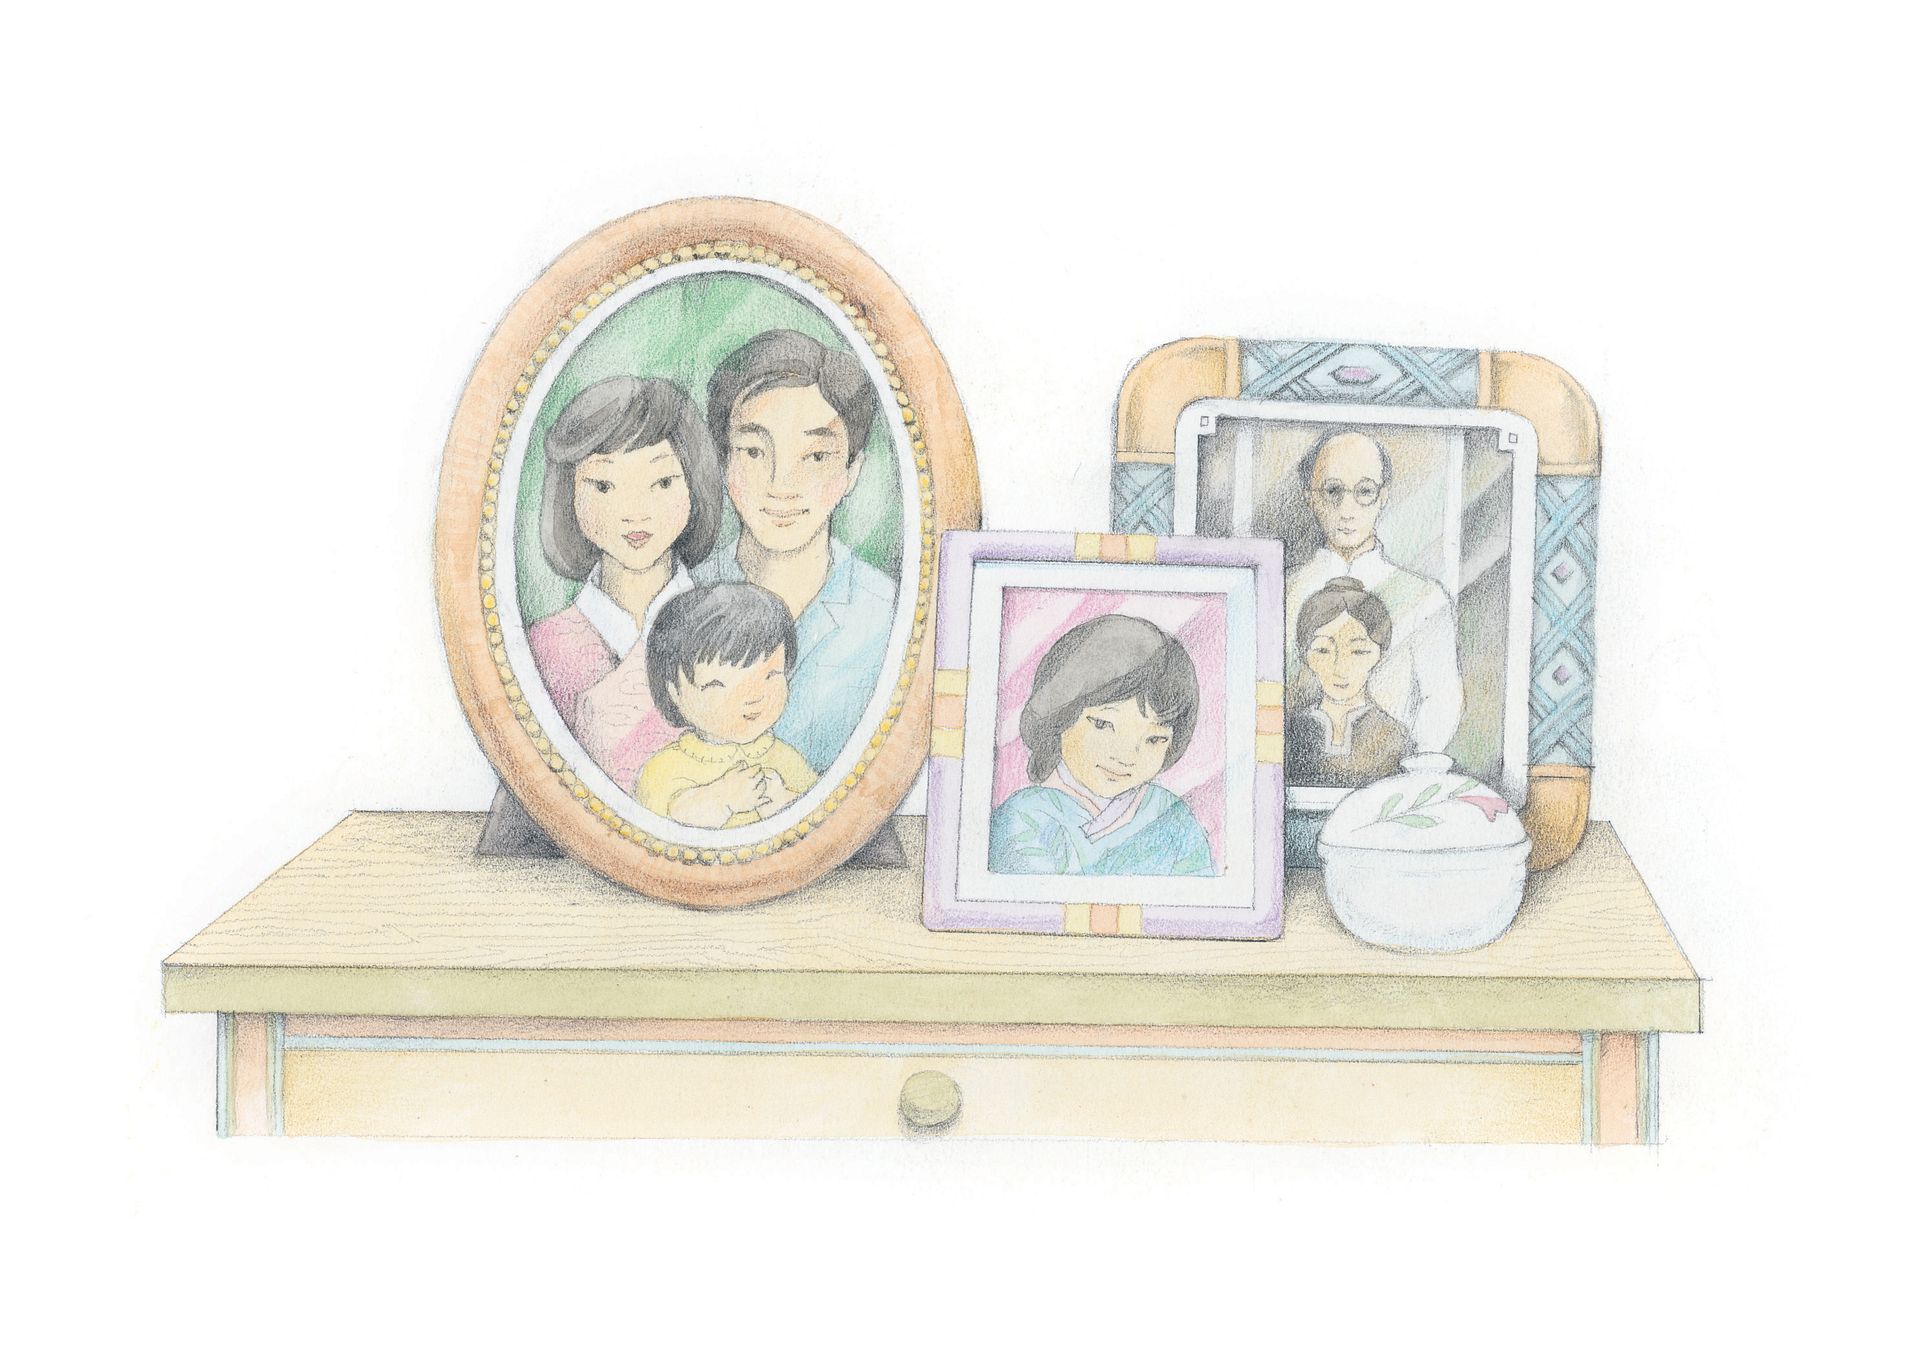 Three family photographs on a nightstand. From the Children’s Songbook, page 92, “The Hearts of the Children”; watercolor illustration by Phyllis Luch.